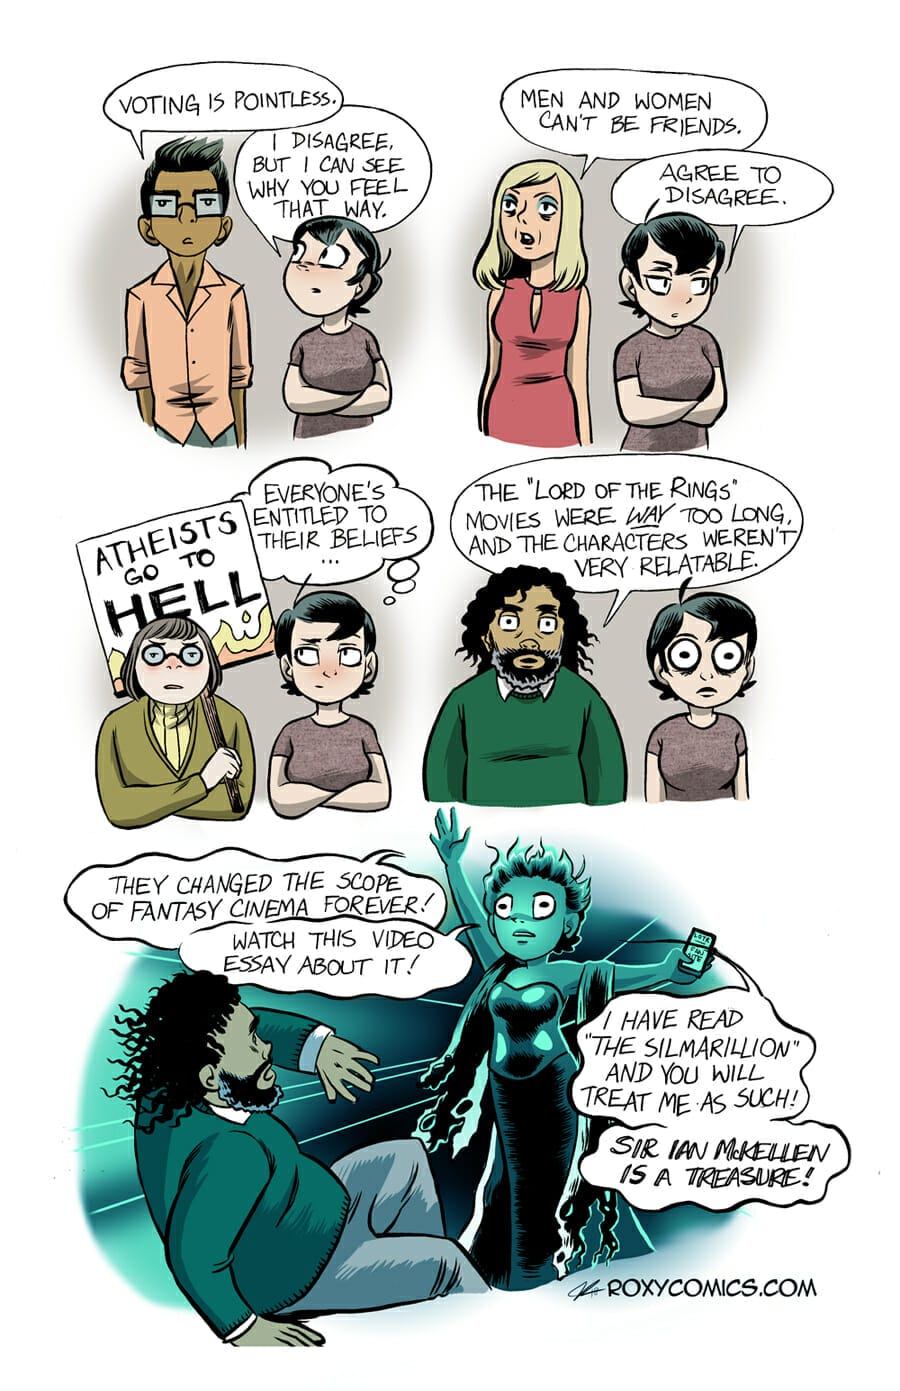 Lord of the Rings comic strip